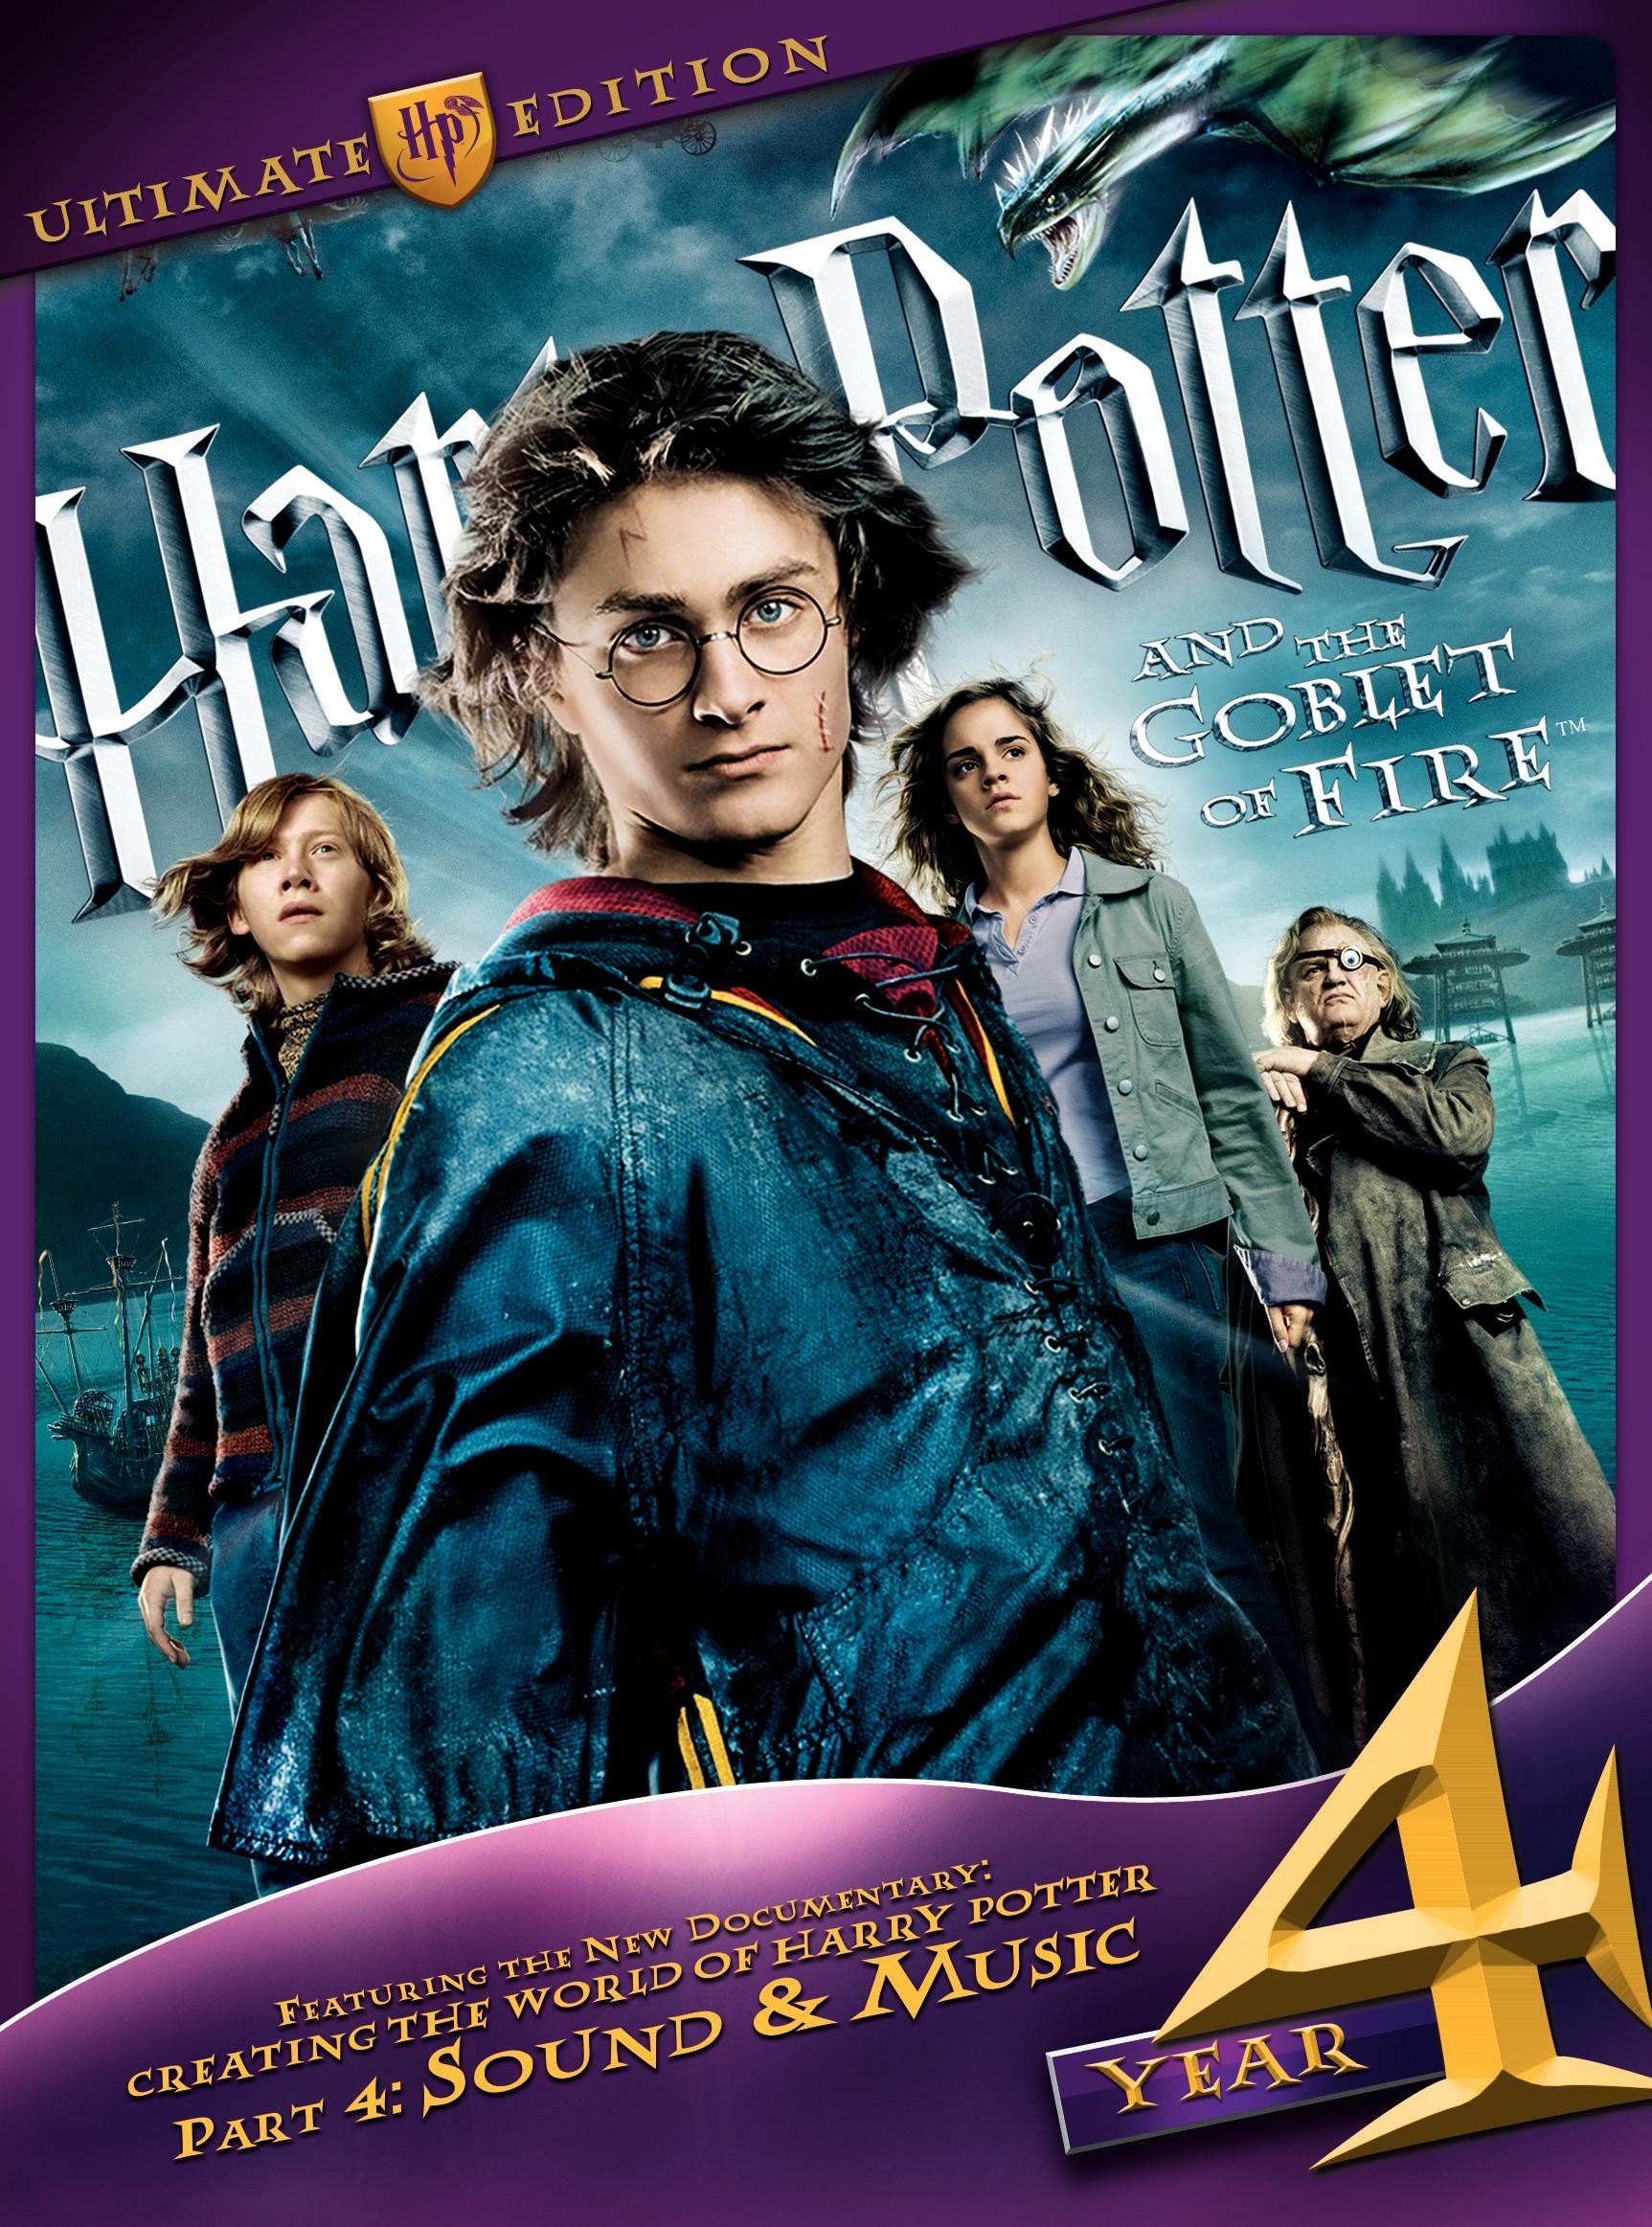 https://www.dvdsreleasedates.com/covers/harry-potter-and-the-goblet-of-fire-dvd-cover-39.jpg